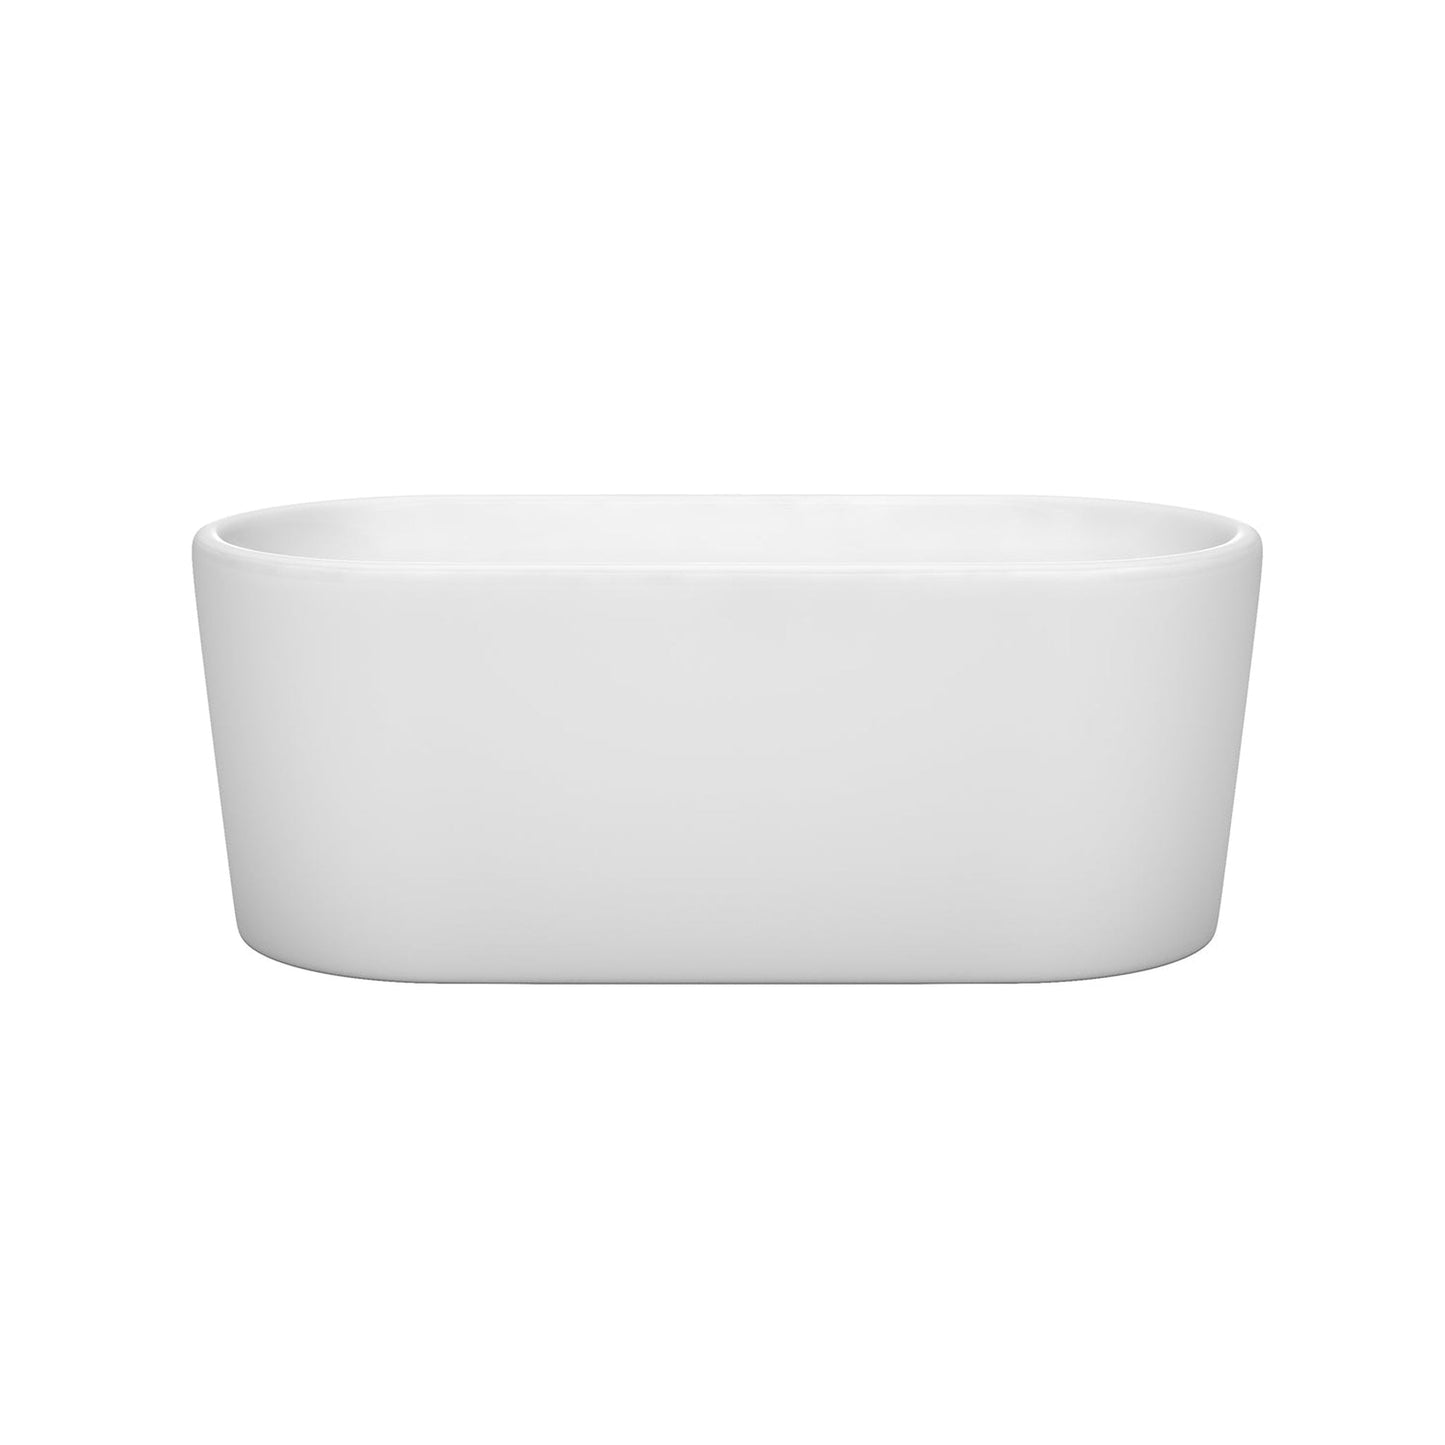 Wyndham Collection Ursula 59" Freestanding Bathtub in White With Shiny White Drain and Overflow Trim